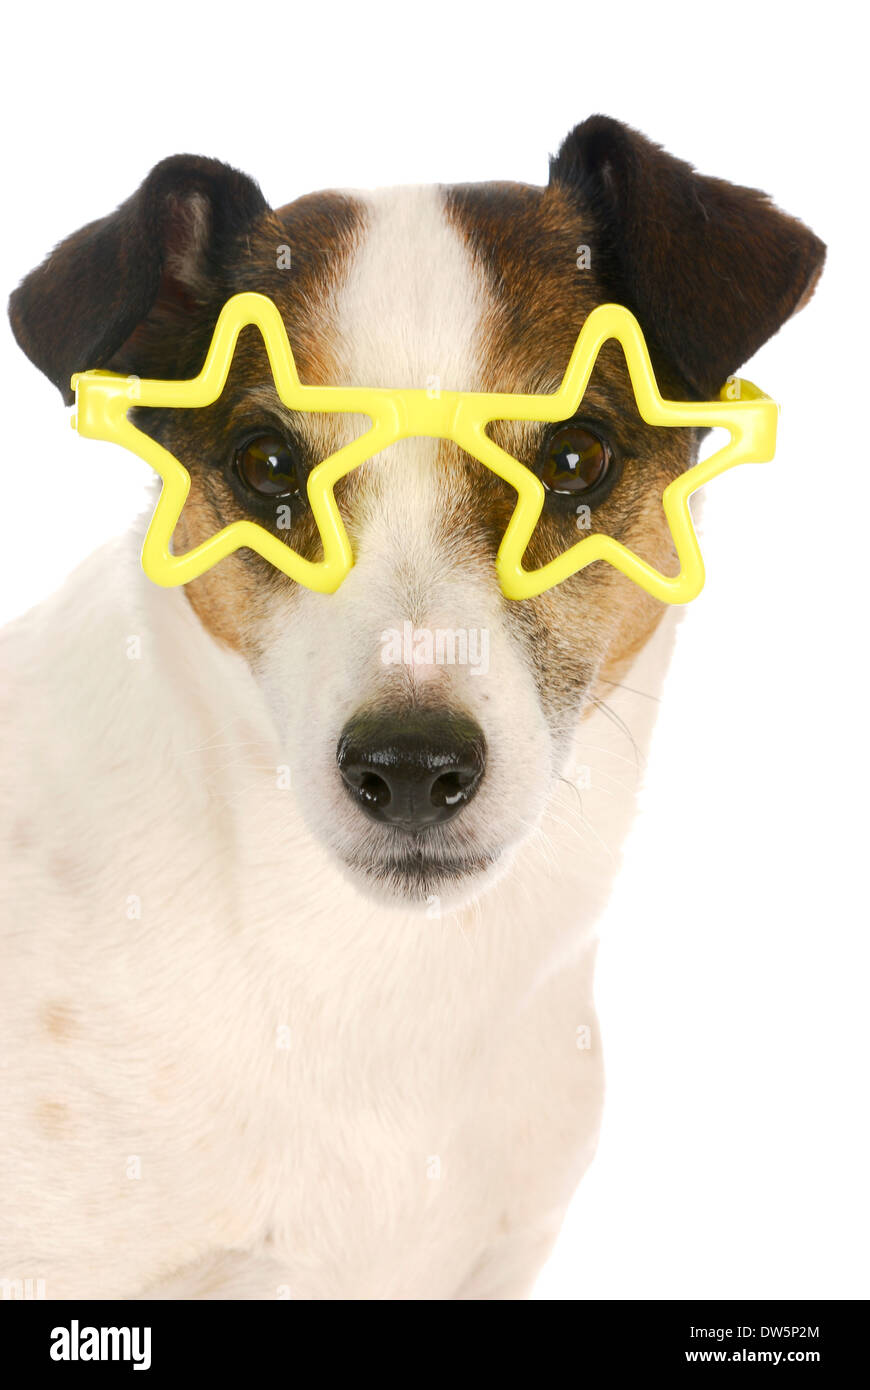 famous dog - jack russel terrier wearing yellow star shaped glasses on white background Stock Photo